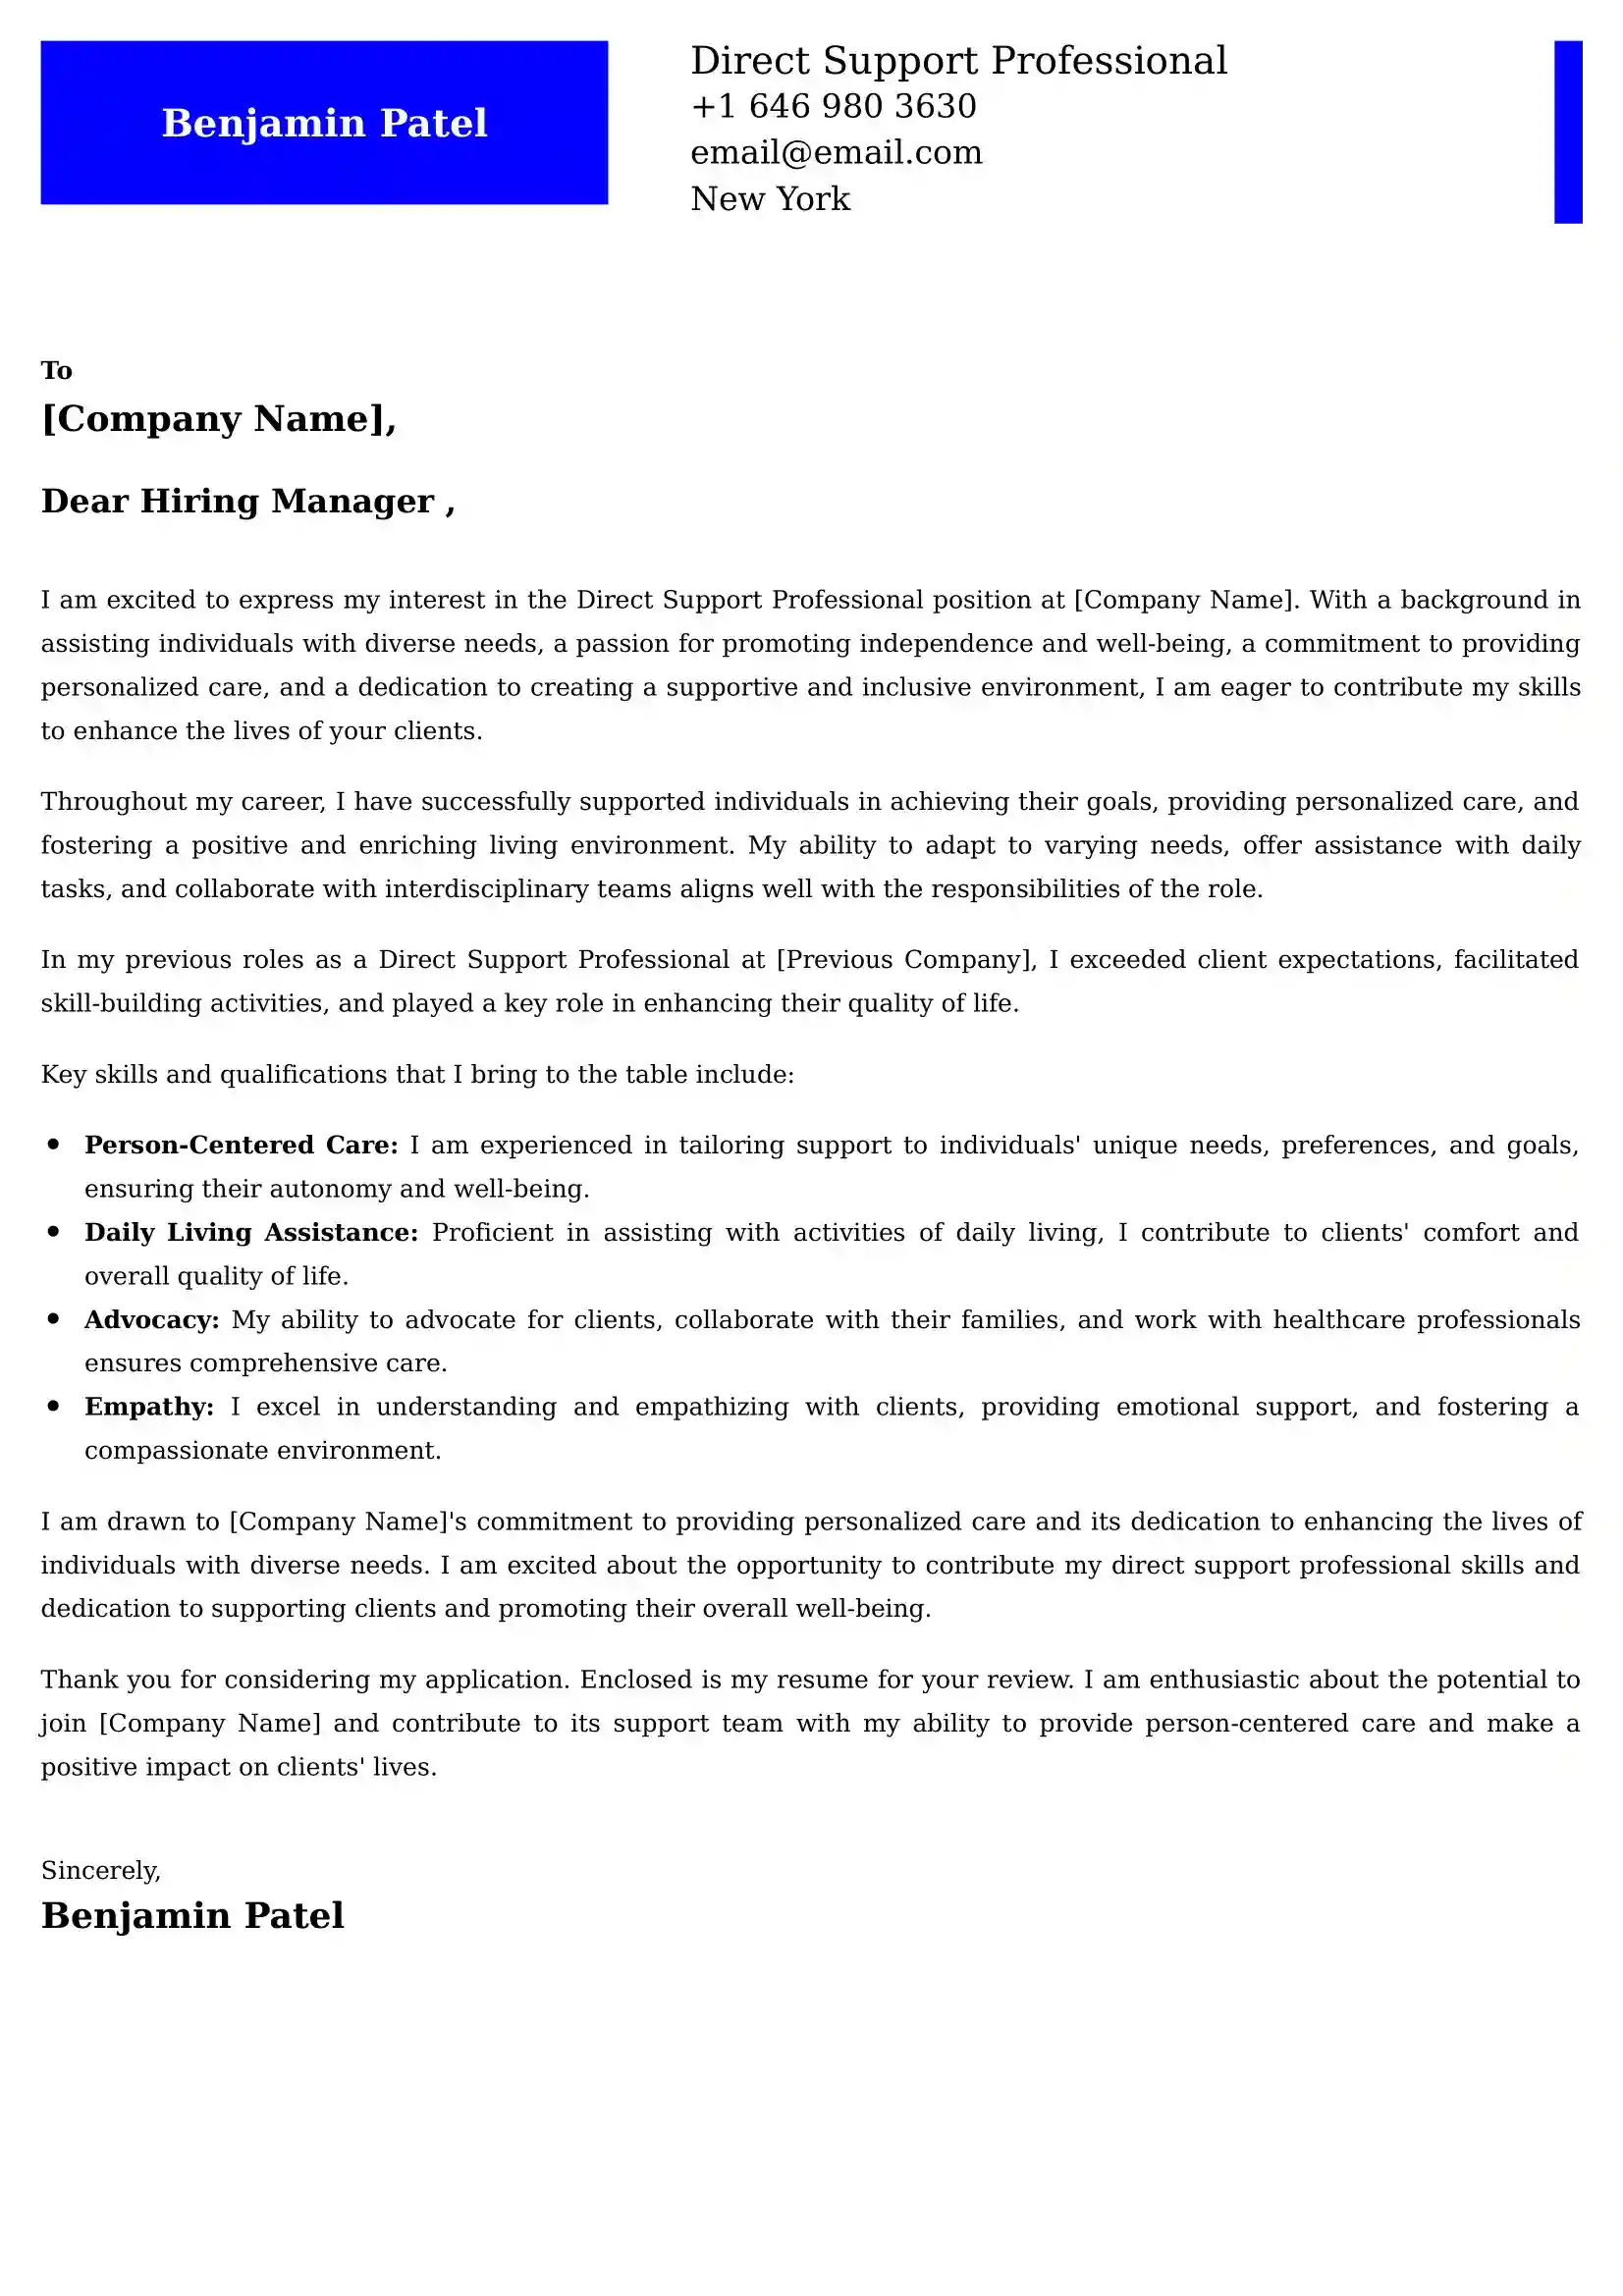 Direct Support Professional Cover Letter Examples - Latest UK Format